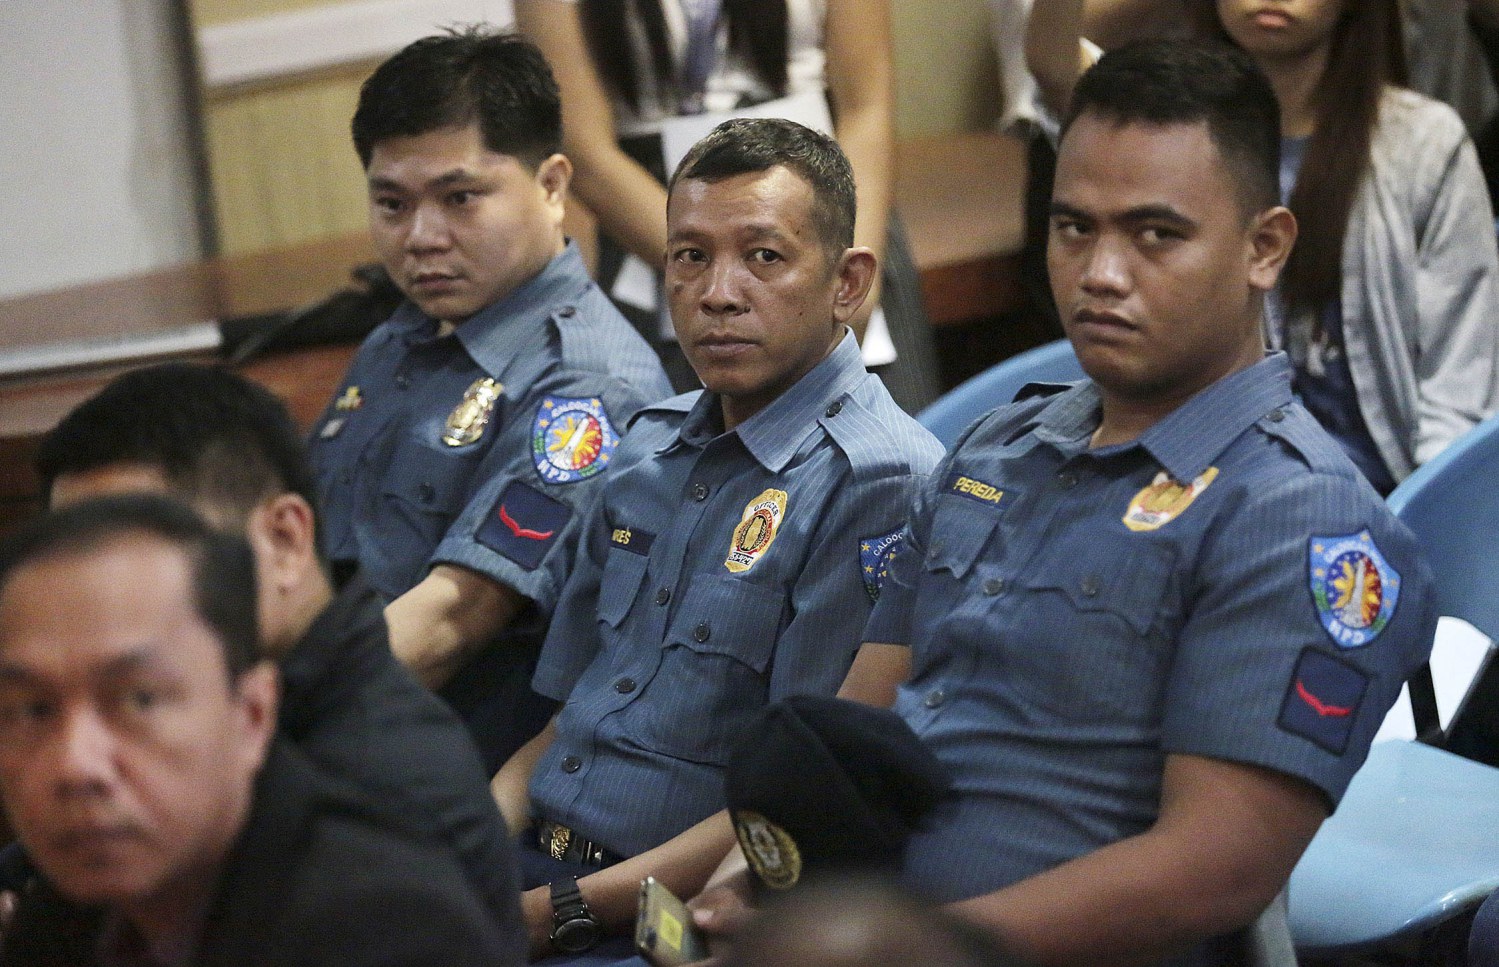 ENDING COURT DRAMA PO1 Jerwin Cruz, PO3 Arnel Oares and PO1 Jeremias Pereda, who were accused of killing Kian delos Santos, show up at the Department of Justice for the preliminary investigation of the case on Sept. 14, 2017. The Caloocan City Regional Trial Court is expected to announce its decision on Thursday.